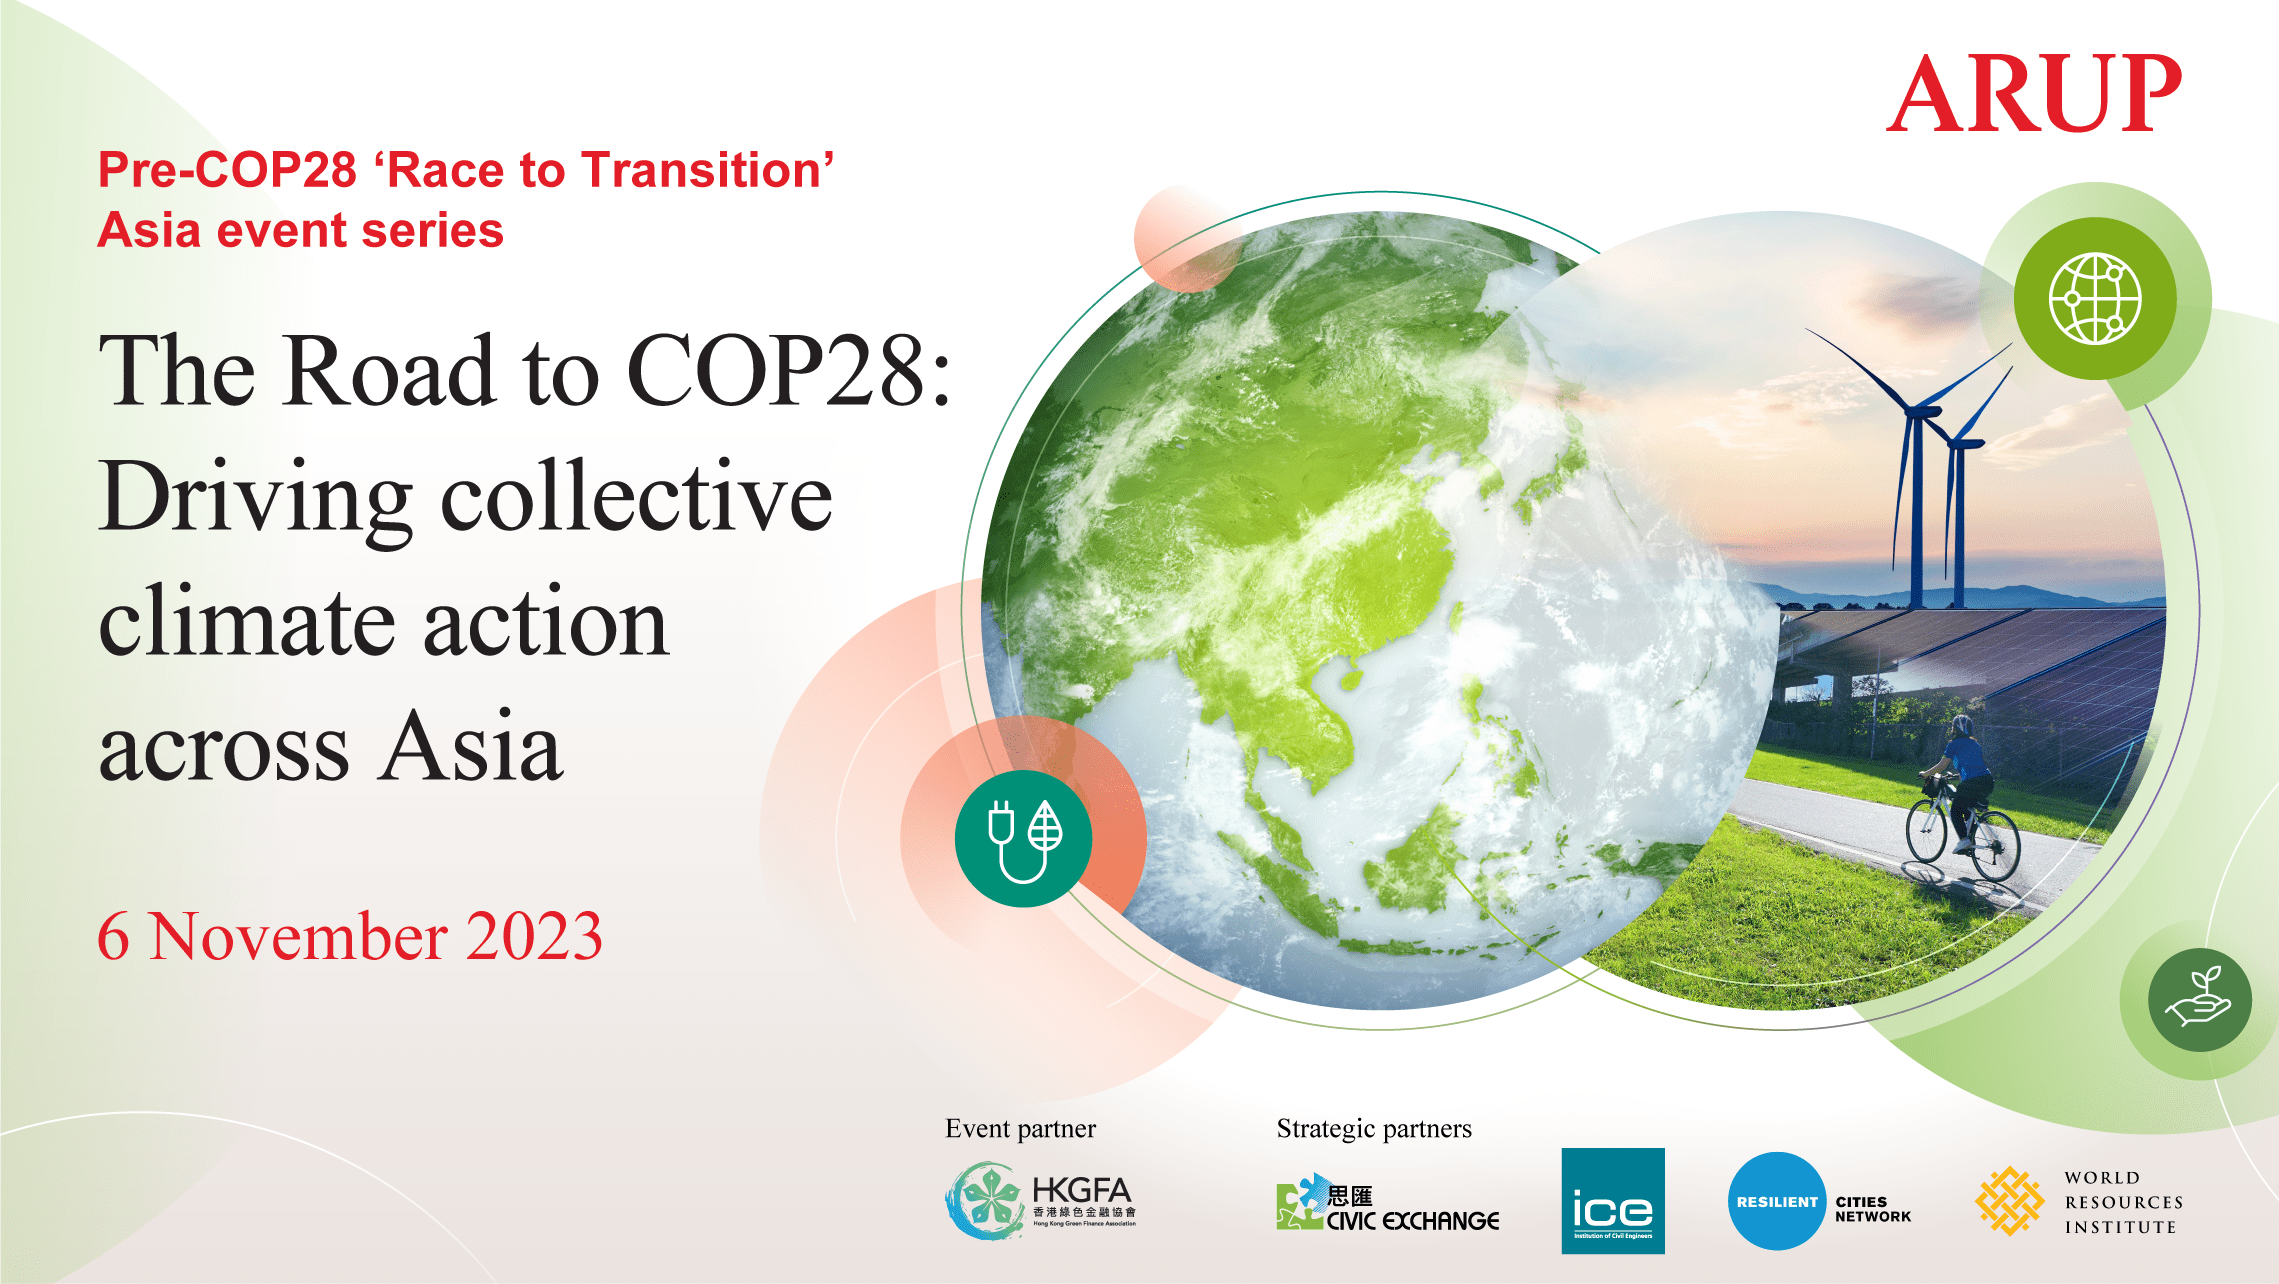 [Pre-COP28 ‘Race to Transition’ Asia event series] The Road to COP28: Driving collective climate action across Asia